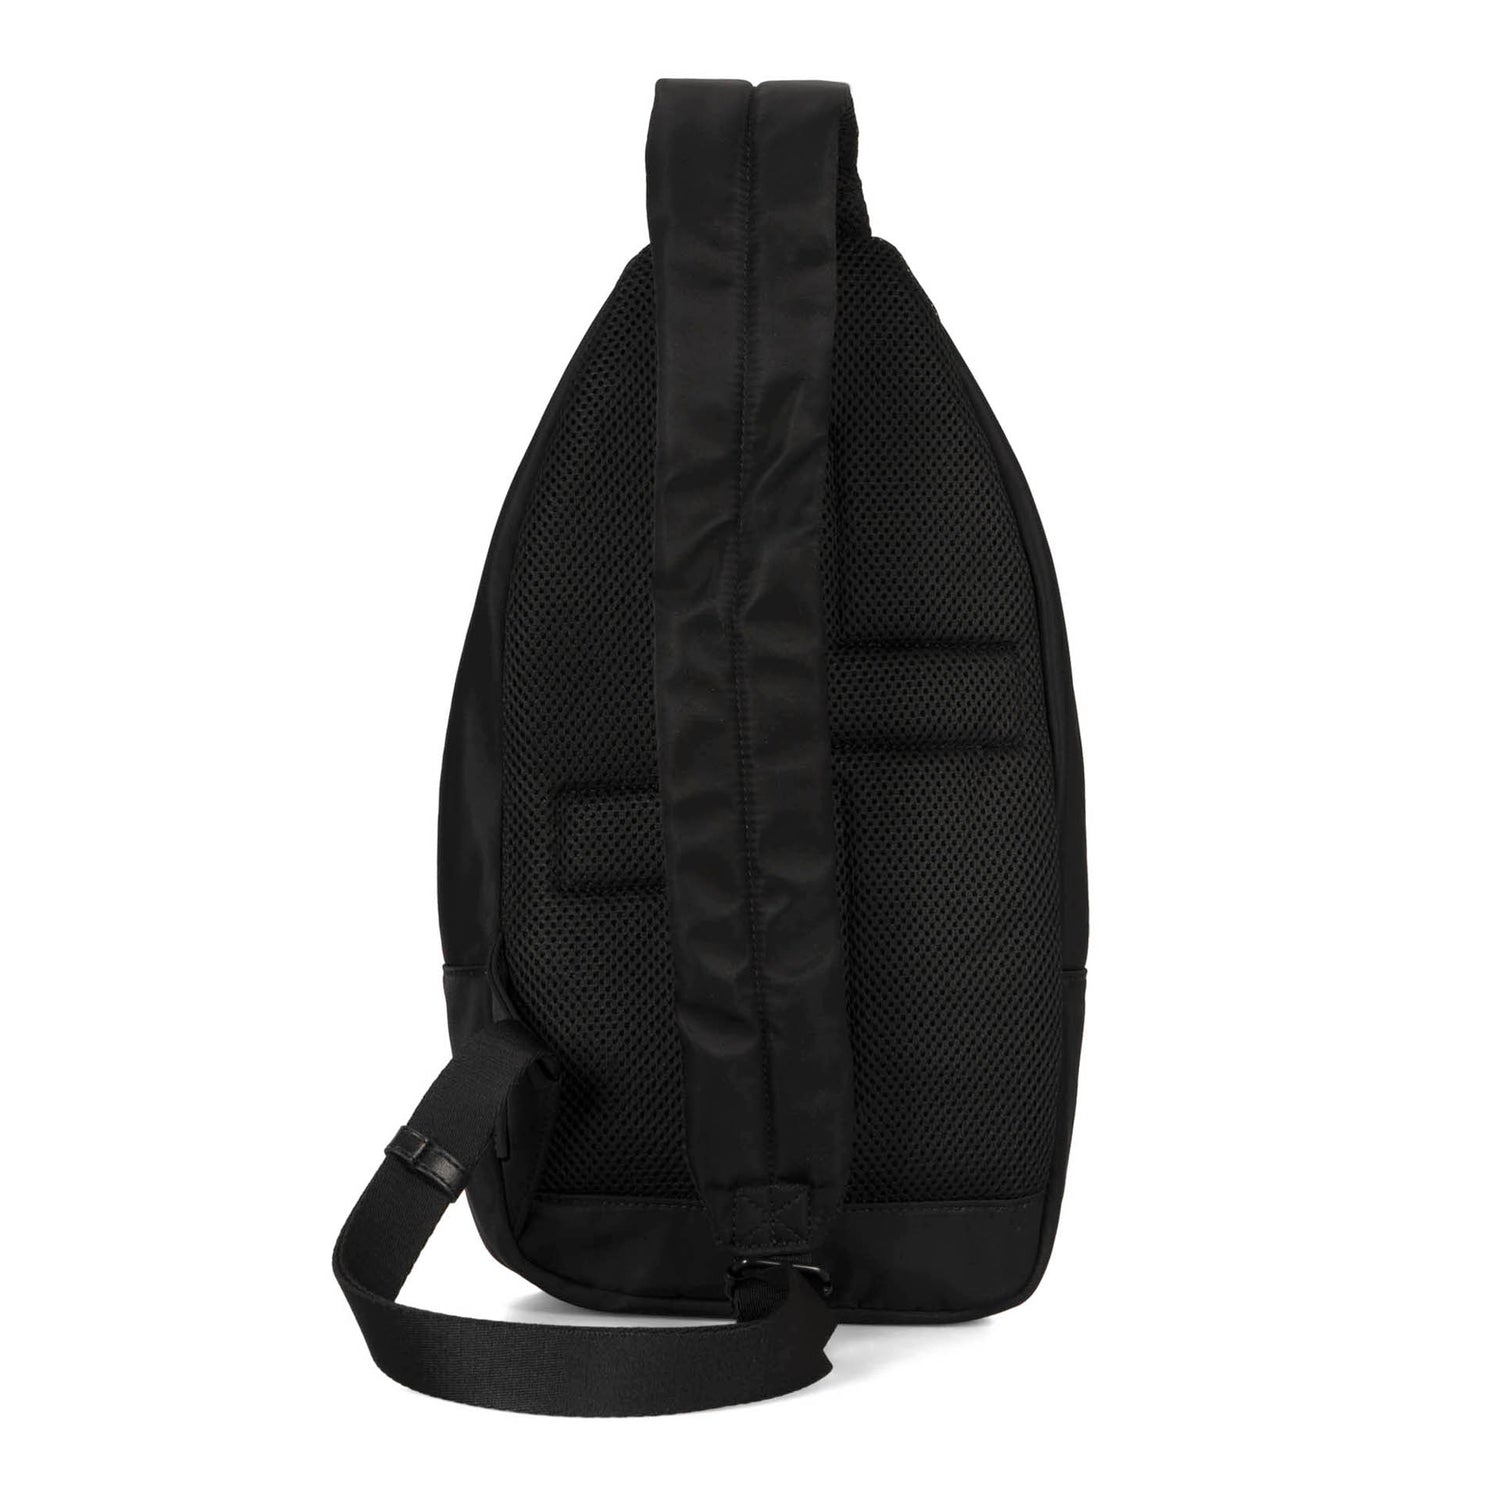 Back side of a black sling bag called suttong designed by Tracker on a white background, showcasing its strap and padded back panel.